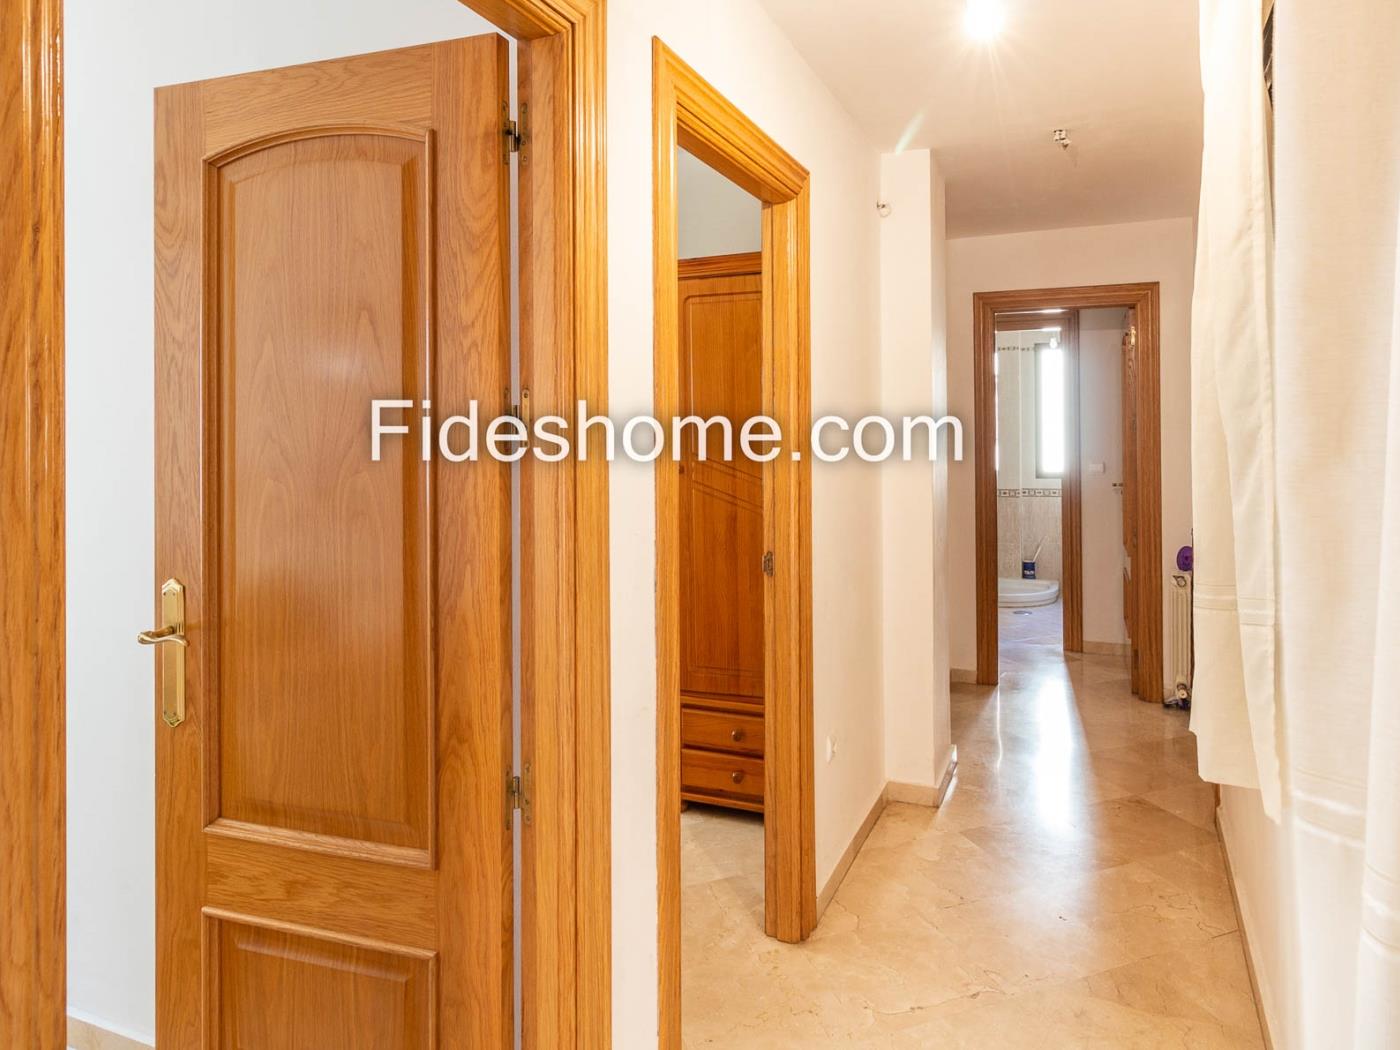 Magnificent 3-bedroom apartment with elevator, garage, storage room, and heating in Órgiva